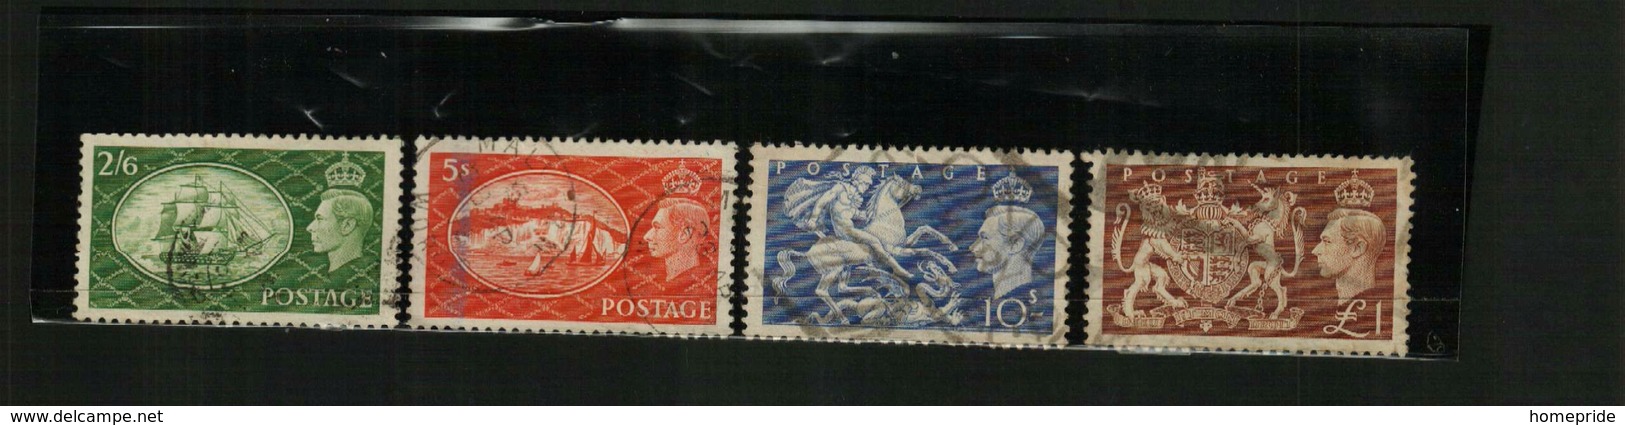 GB – GVI – 1951 - HIGH VALUES - USED - 4 Stamps - Used Stamps